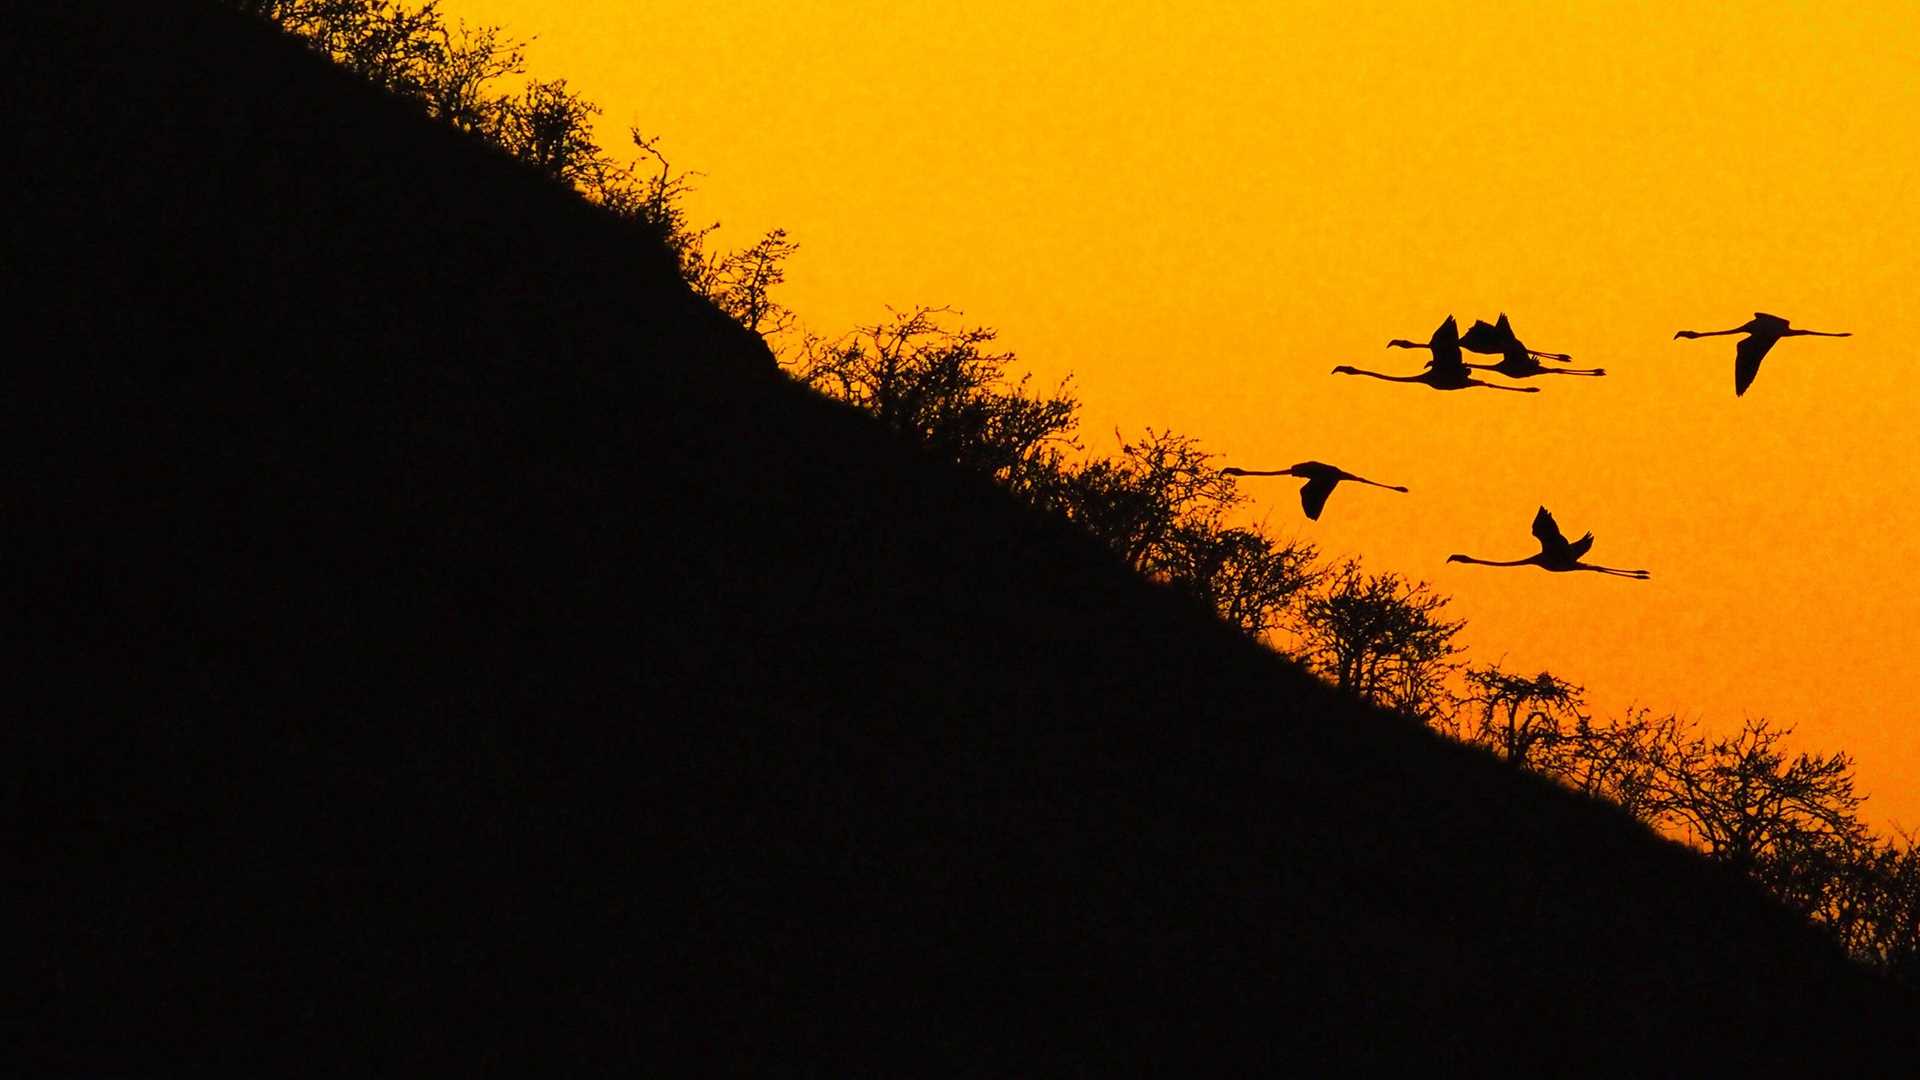 silhouette of flamingos in flight in front of an orange sunset